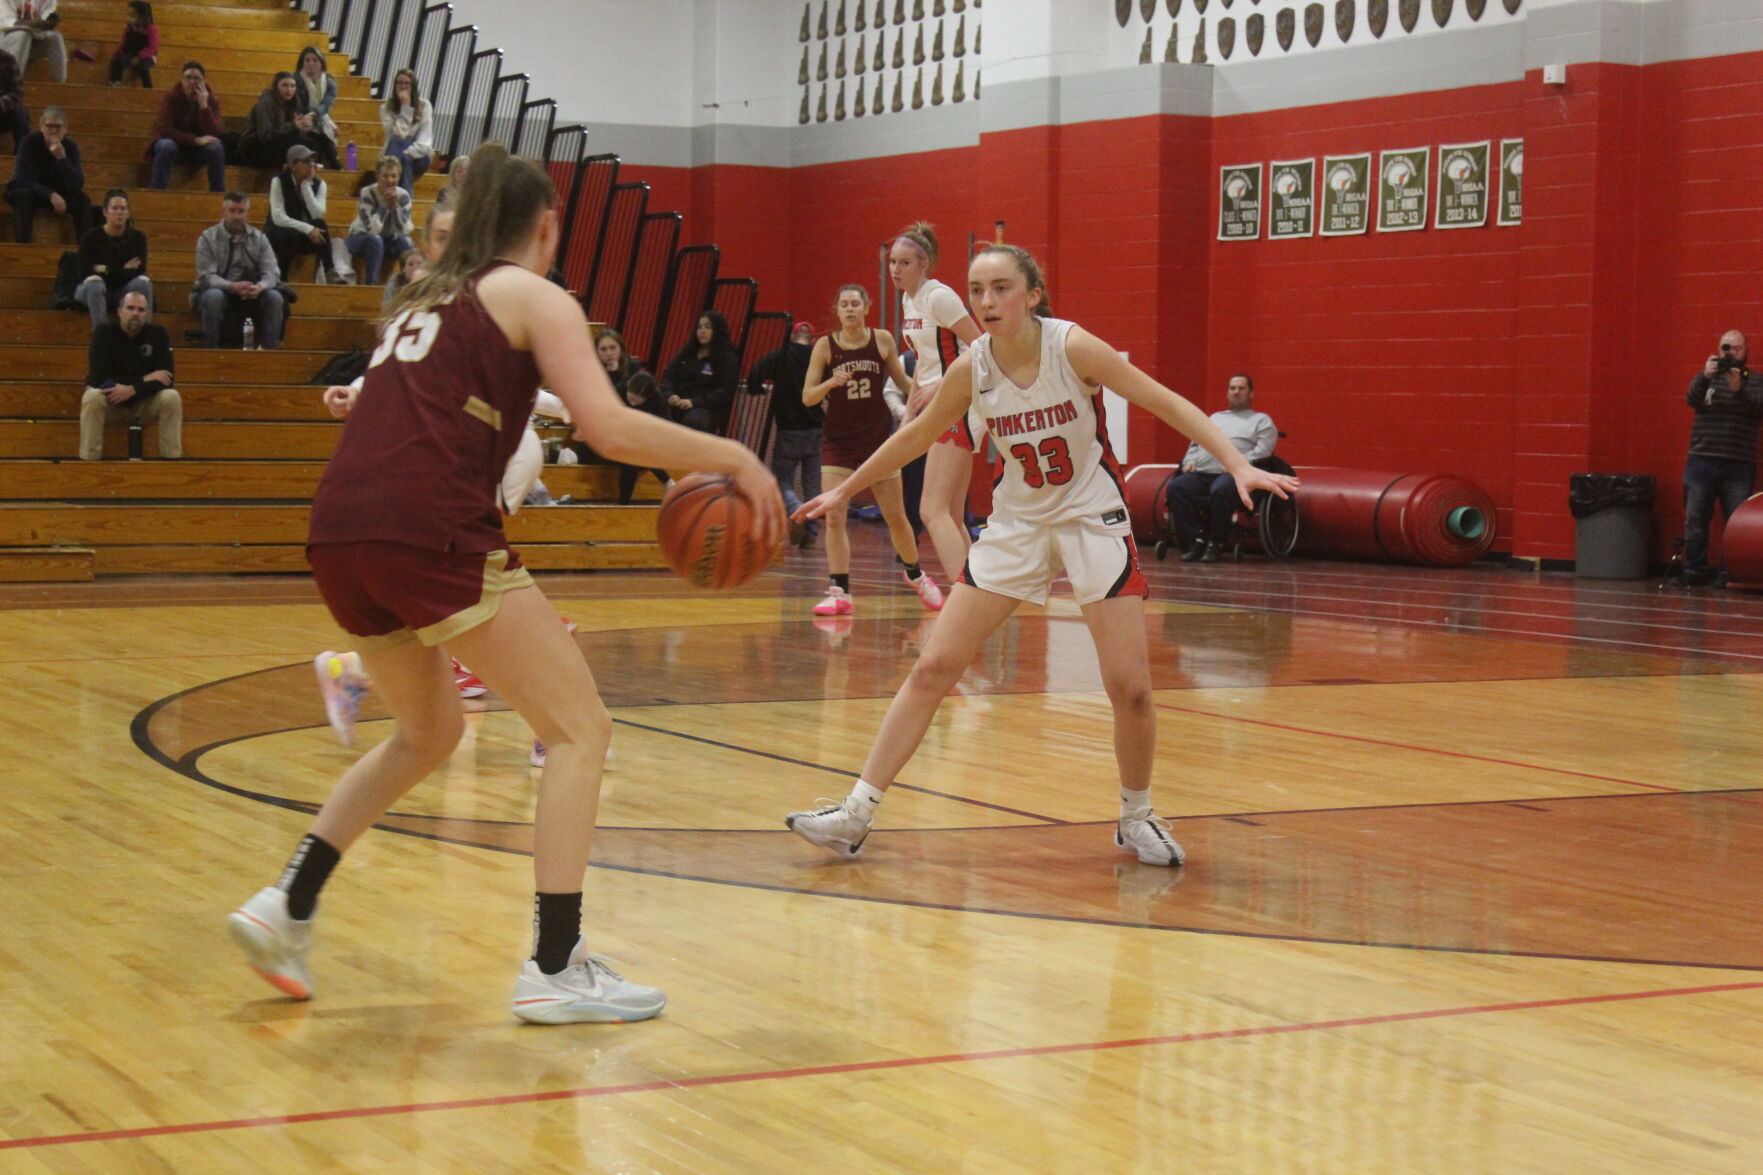 Sydney Gerossie’s Career-High 28 Points Lead Pinkerton to Victory over Portsmouth